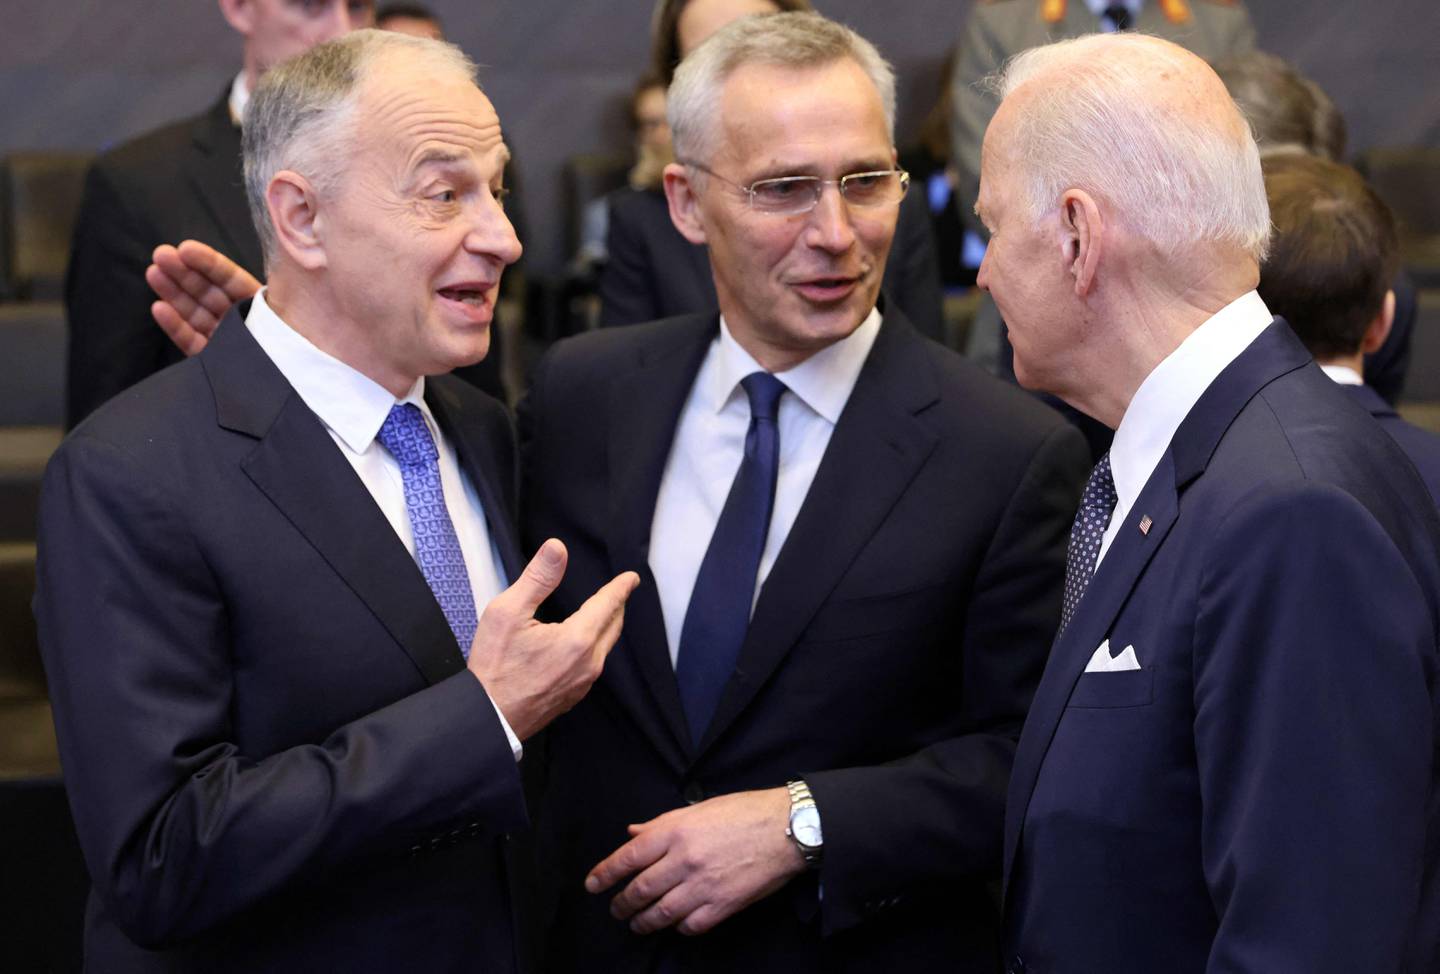 (L/R): NATO deputy Secretary General Mircea Geoana, NATO Secretary General Jens Stoltenberg and US President Joe Biden speak ahead of a meeting of The North Atlantic Council at NATO Headquarters in Brussels on March 24, 2022. (Photo by Thomas COEX / AFP)